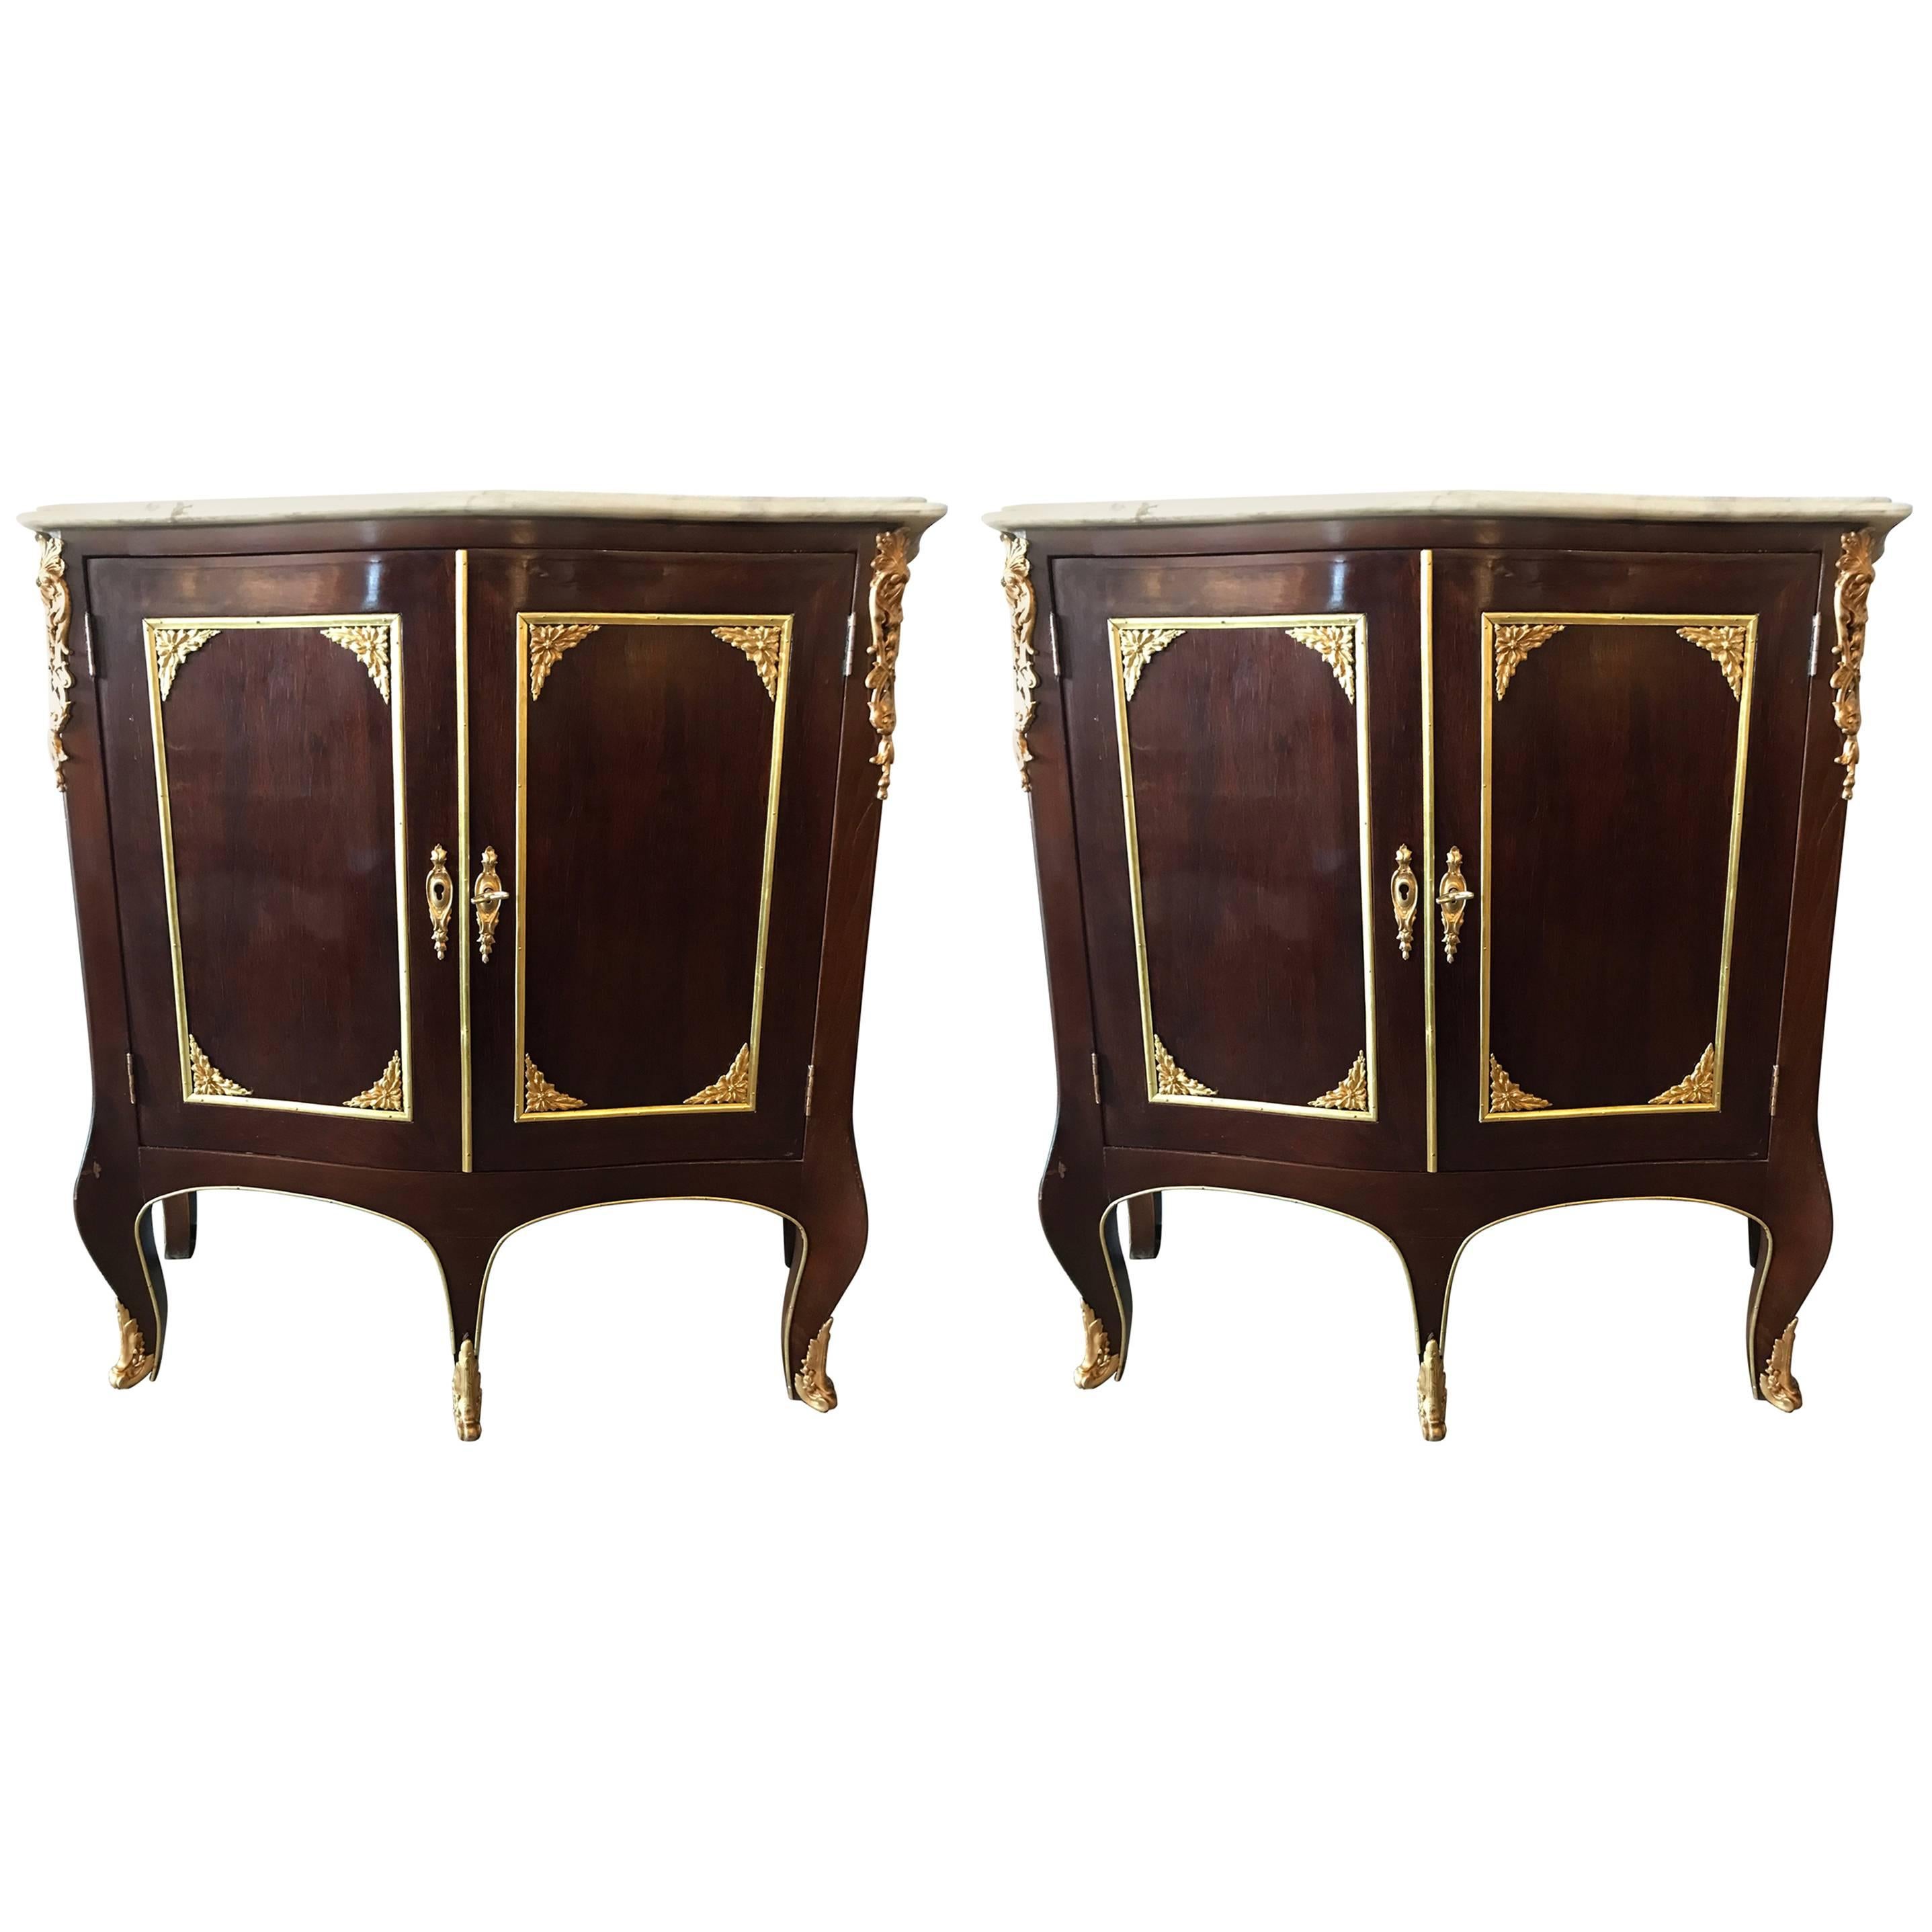 Maison Jansen Style, Louis XV Cabinets, Mahogany, Marble, Europe, 1970s For Sale